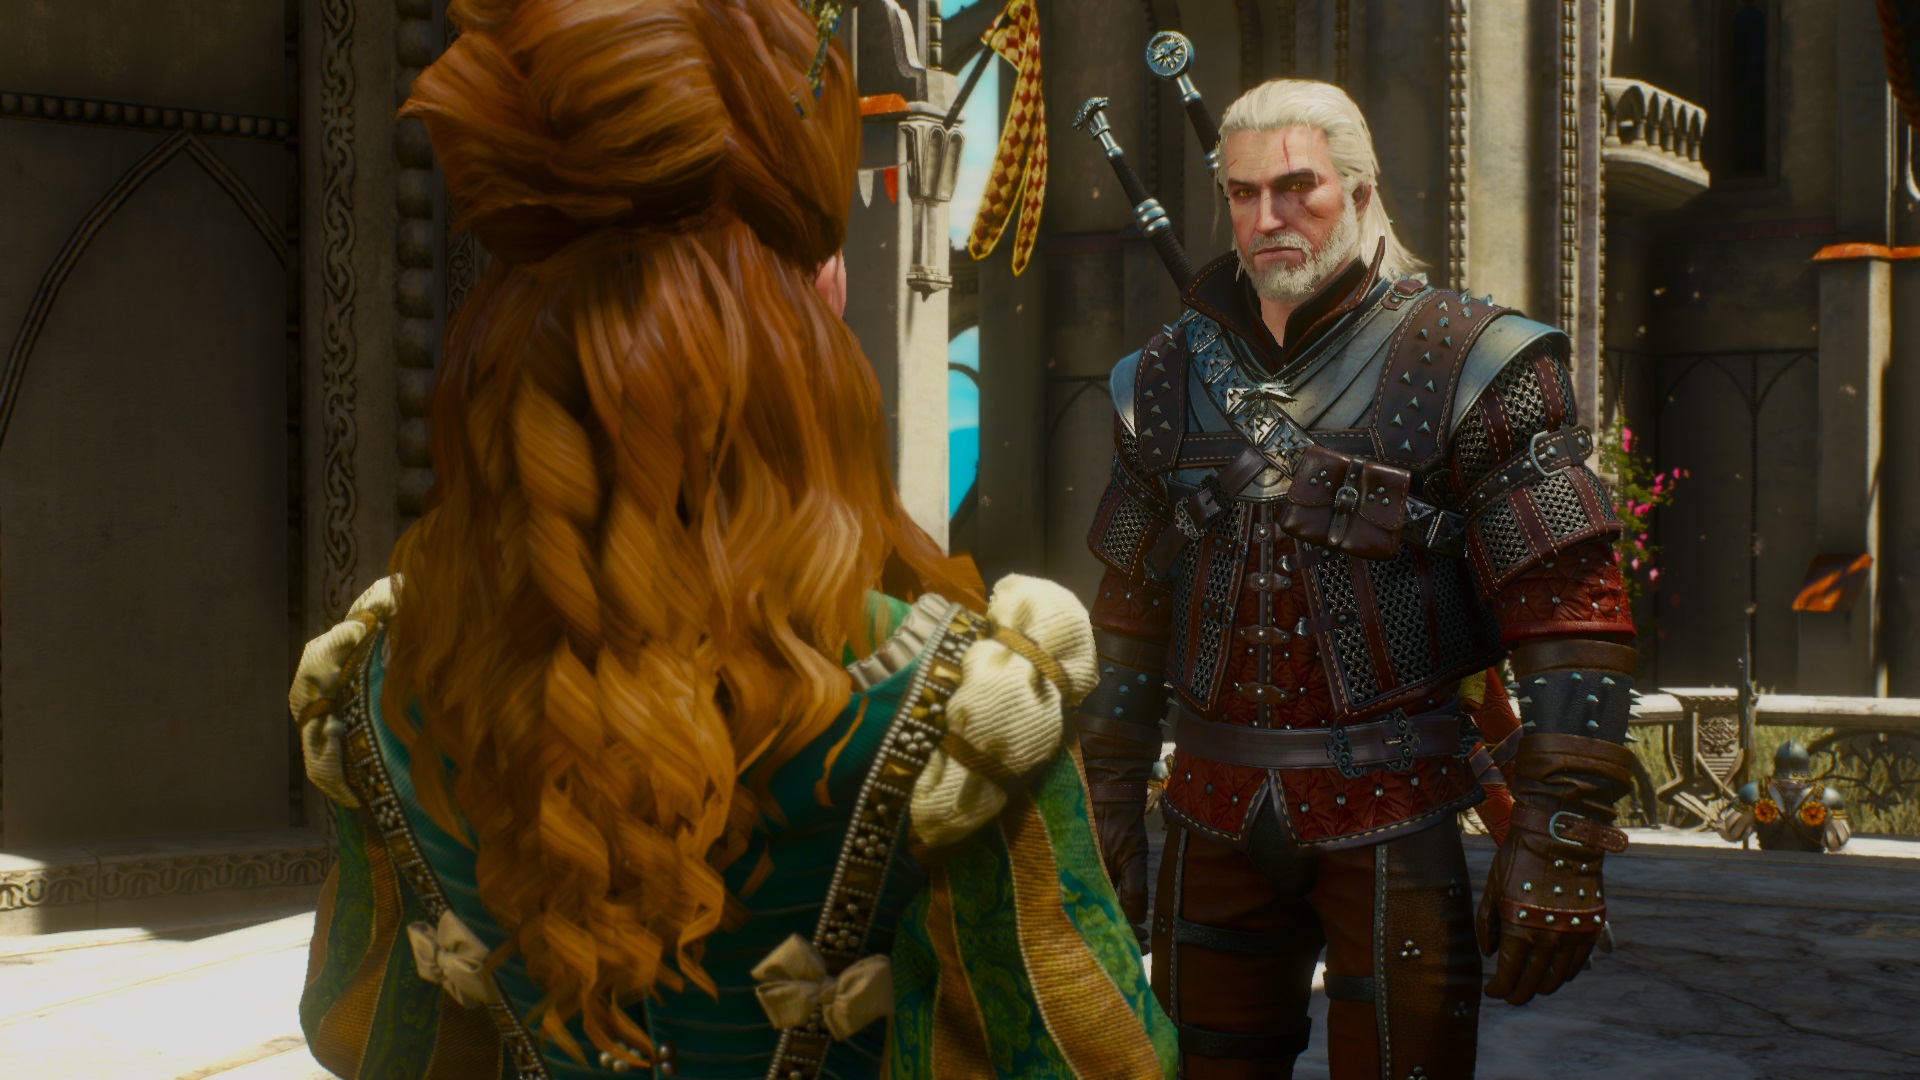 Read more about the article Где найти снаряжение школы Волка в The Witcher 3: Wild Hunt.